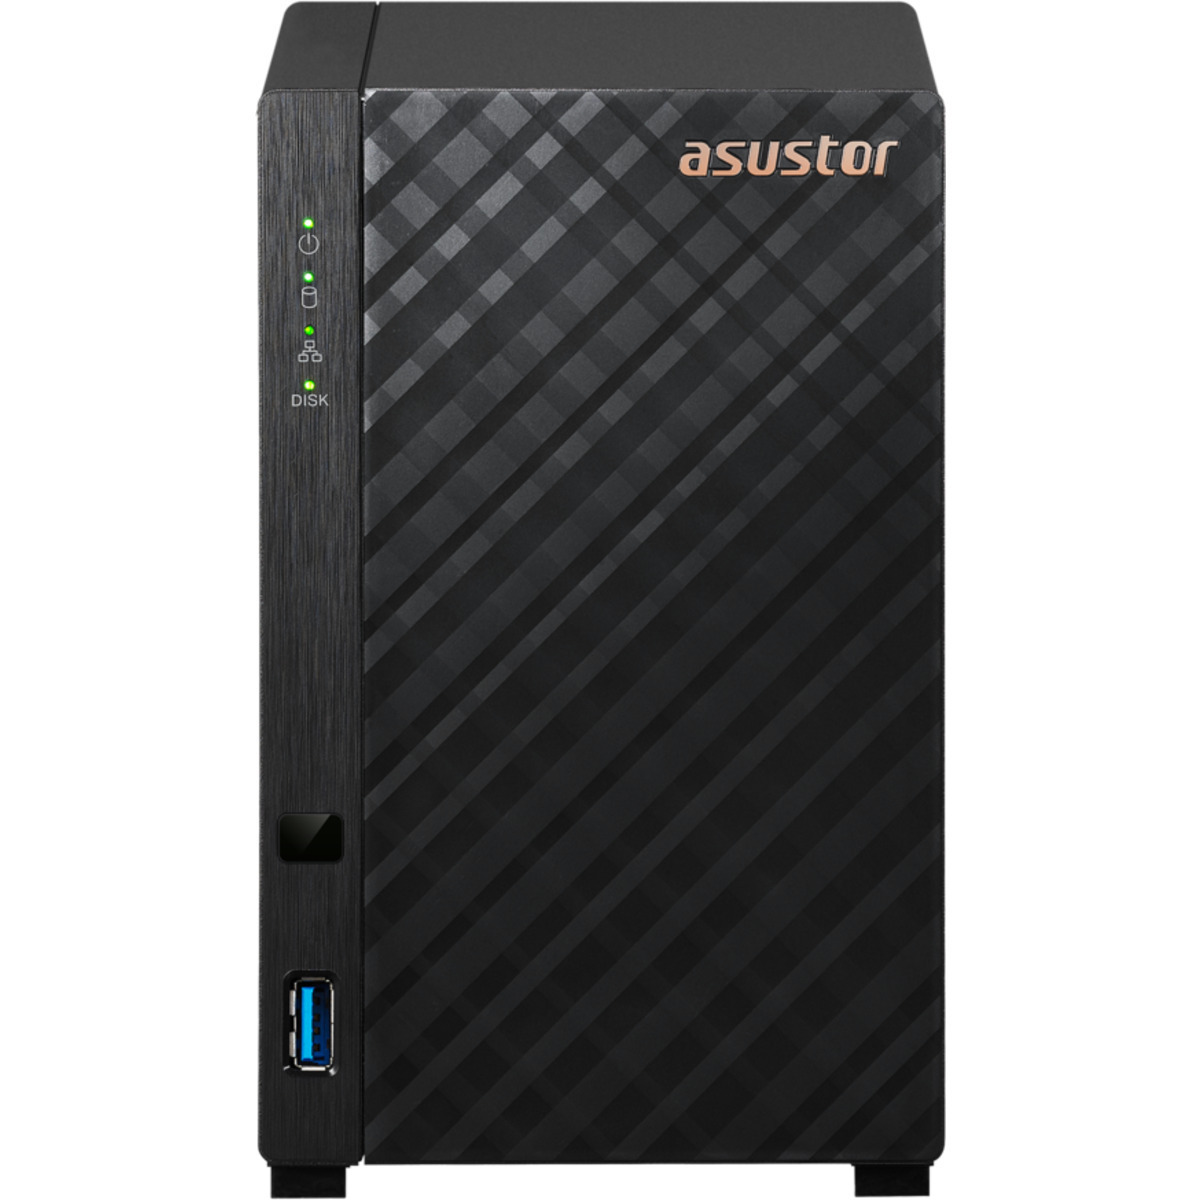 ASUSTOR DRIVESTOR 2 Lite AS1102TL 12tb 2-Bay Desktop Personal / Basic Home / Small Office NAS - Network Attached Storage Device 2x6tb Seagate IronWolf Pro ST6000NT001 3.5 7200rpm SATA 6Gb/s HDD NAS Class Drives Installed - Burn-In Tested DRIVESTOR 2 Lite AS1102TL